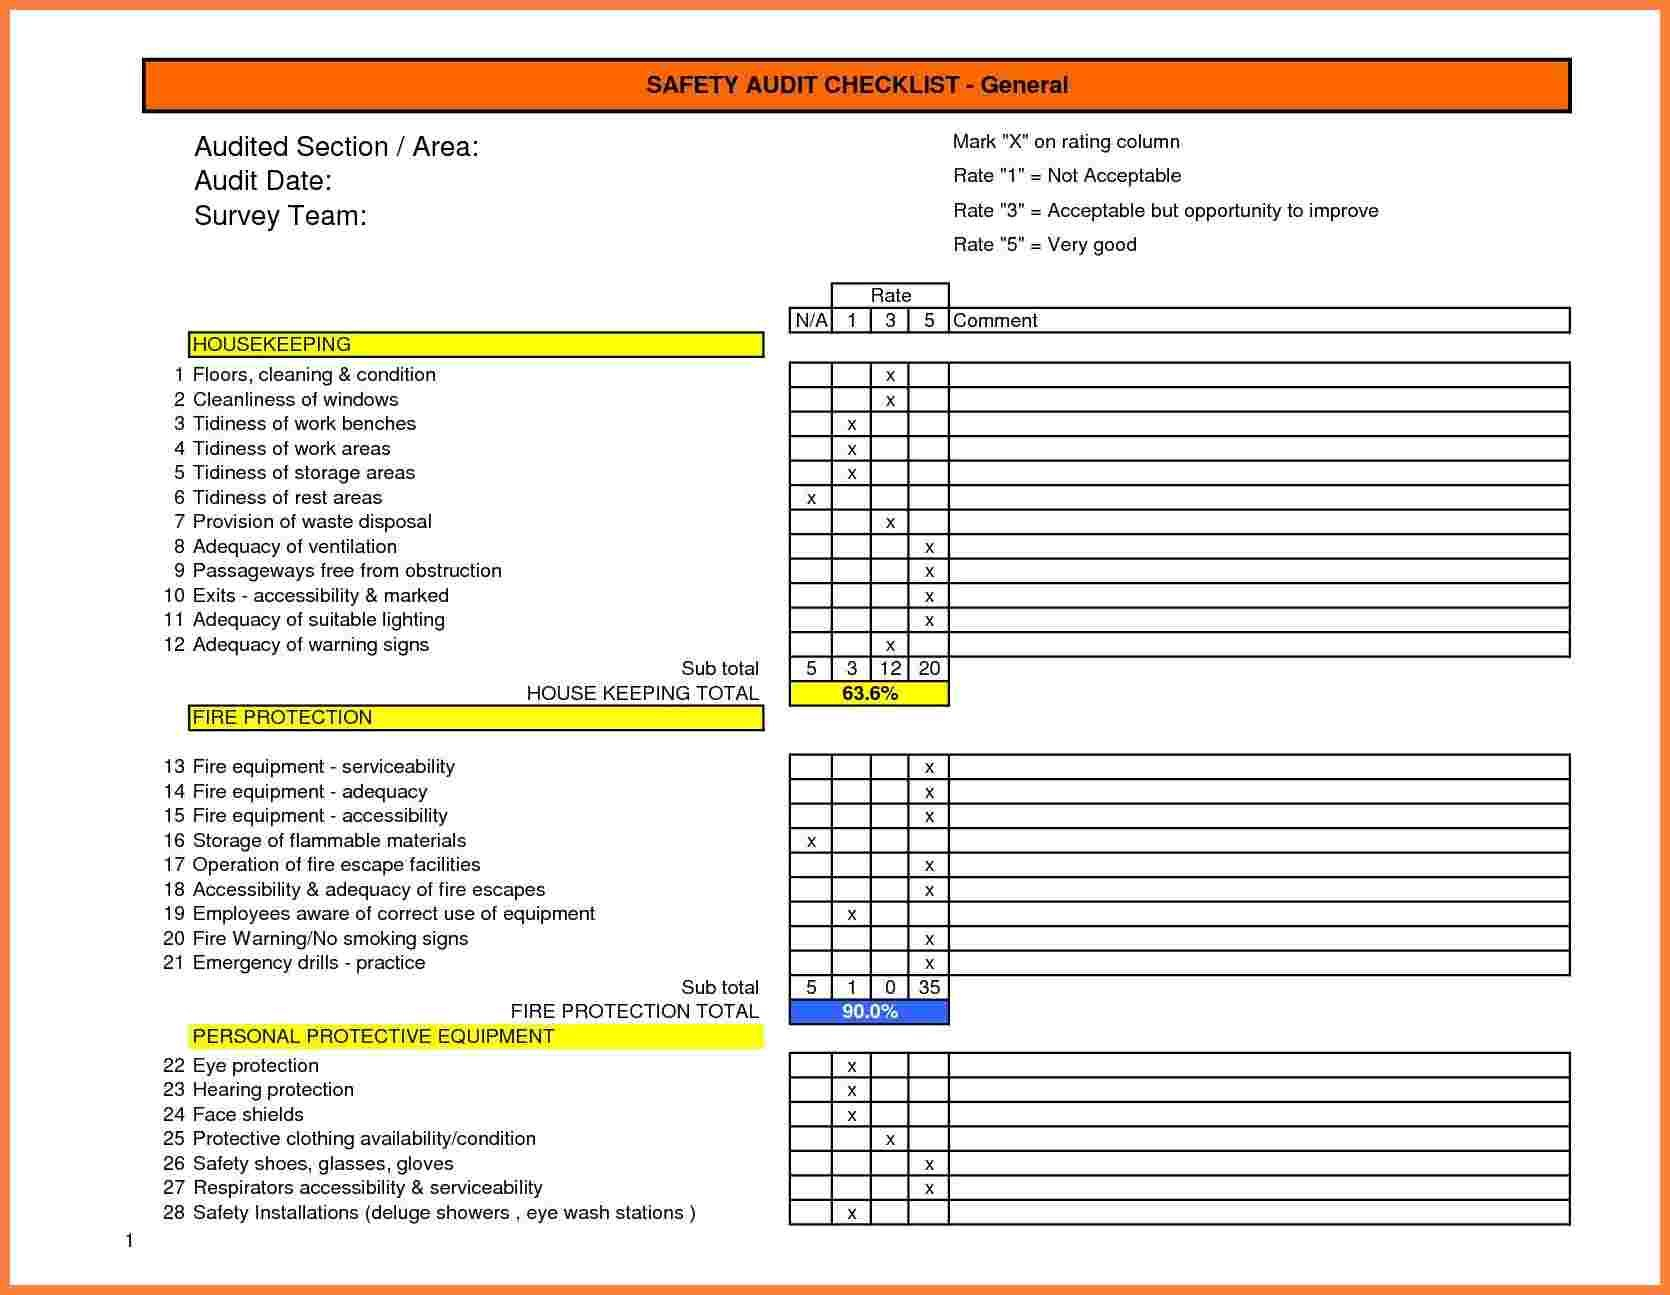 Image Result For Warehouse Health And Safety Audit Form With Safety Analysis Report Template